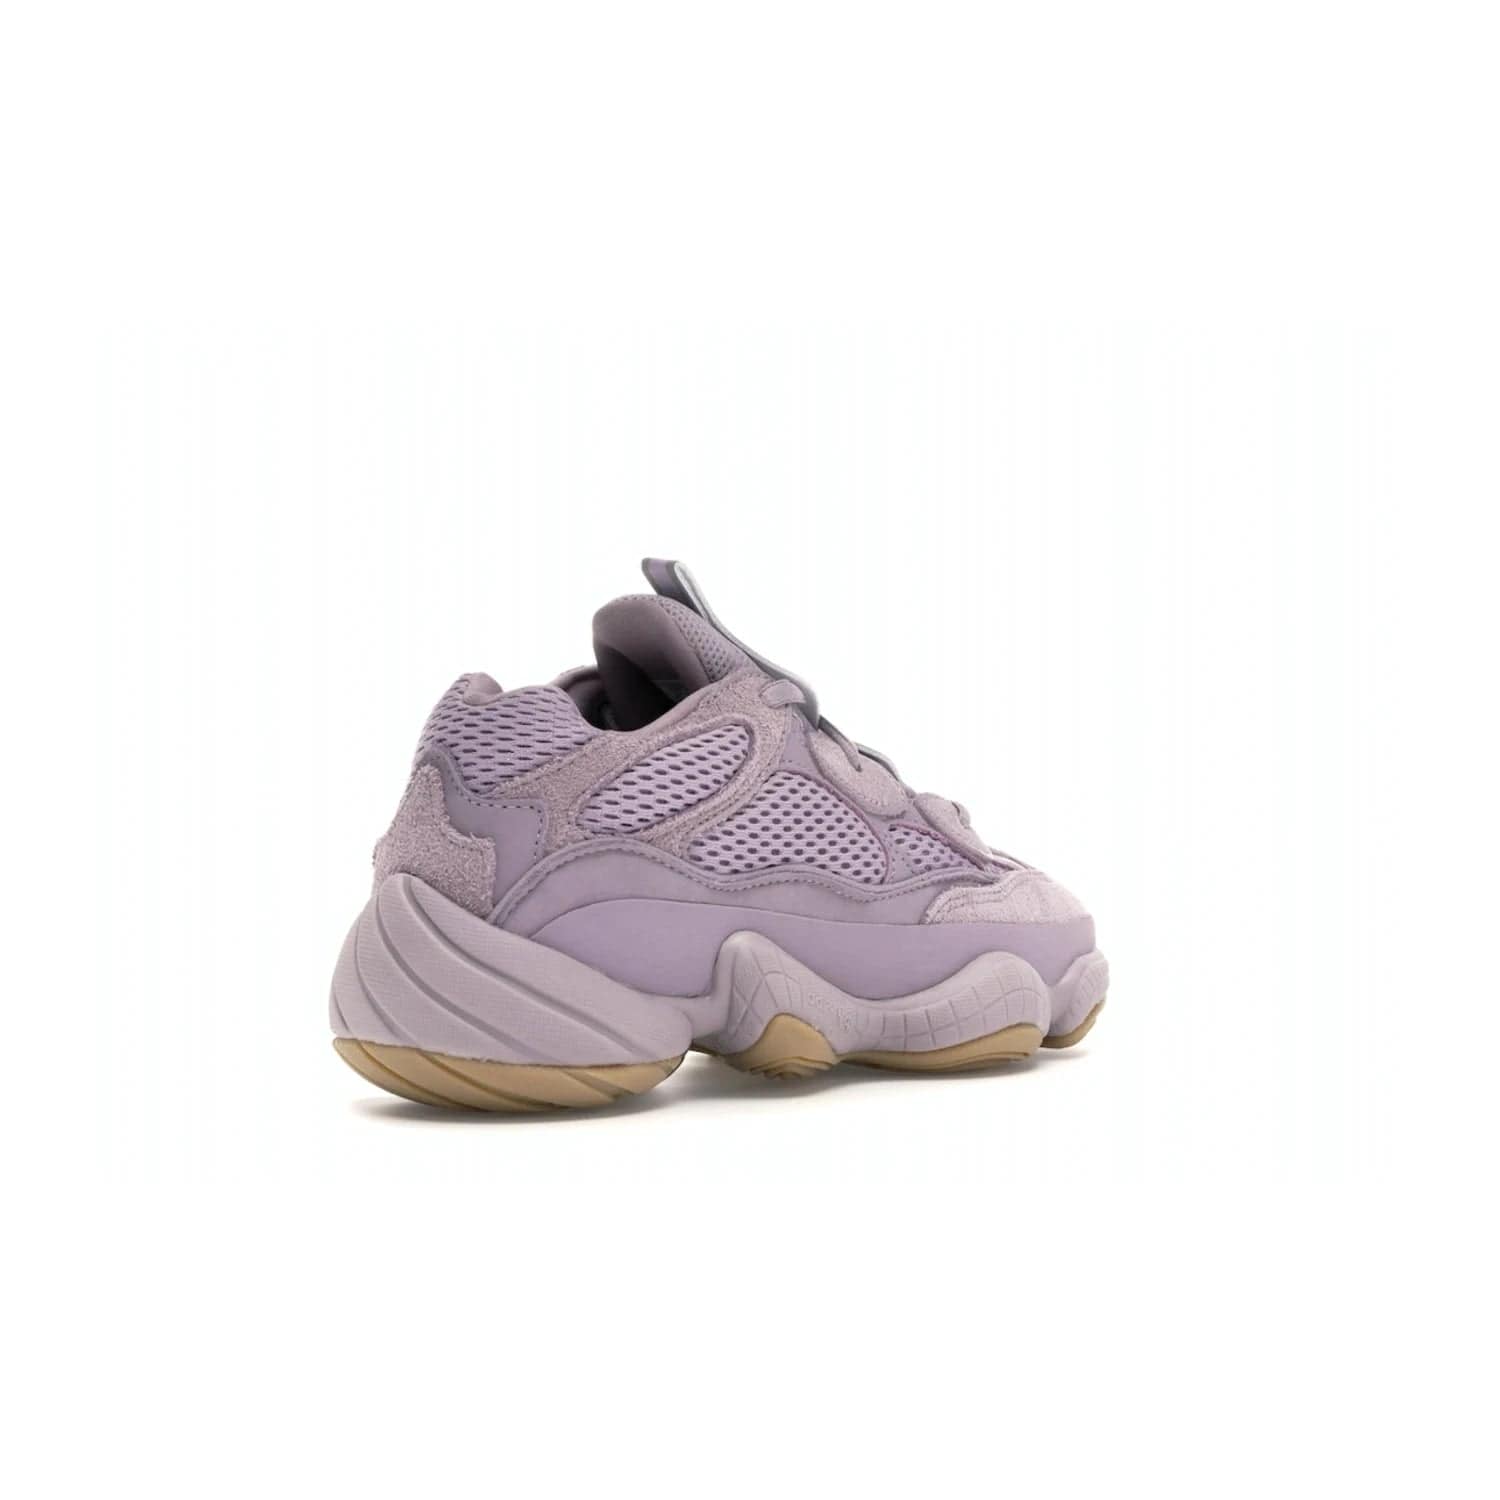 adidas Yeezy 500 Soft Vision - Image 32 - Only at www.BallersClubKickz.com - New adidas Yeezy 500 Soft Vision sneaker featuring a combination of mesh, leather, and suede in a classic Soft Vision colorway. Gum rubber outsole ensures durability and traction. An everyday sneaker that stands out from the crowd.